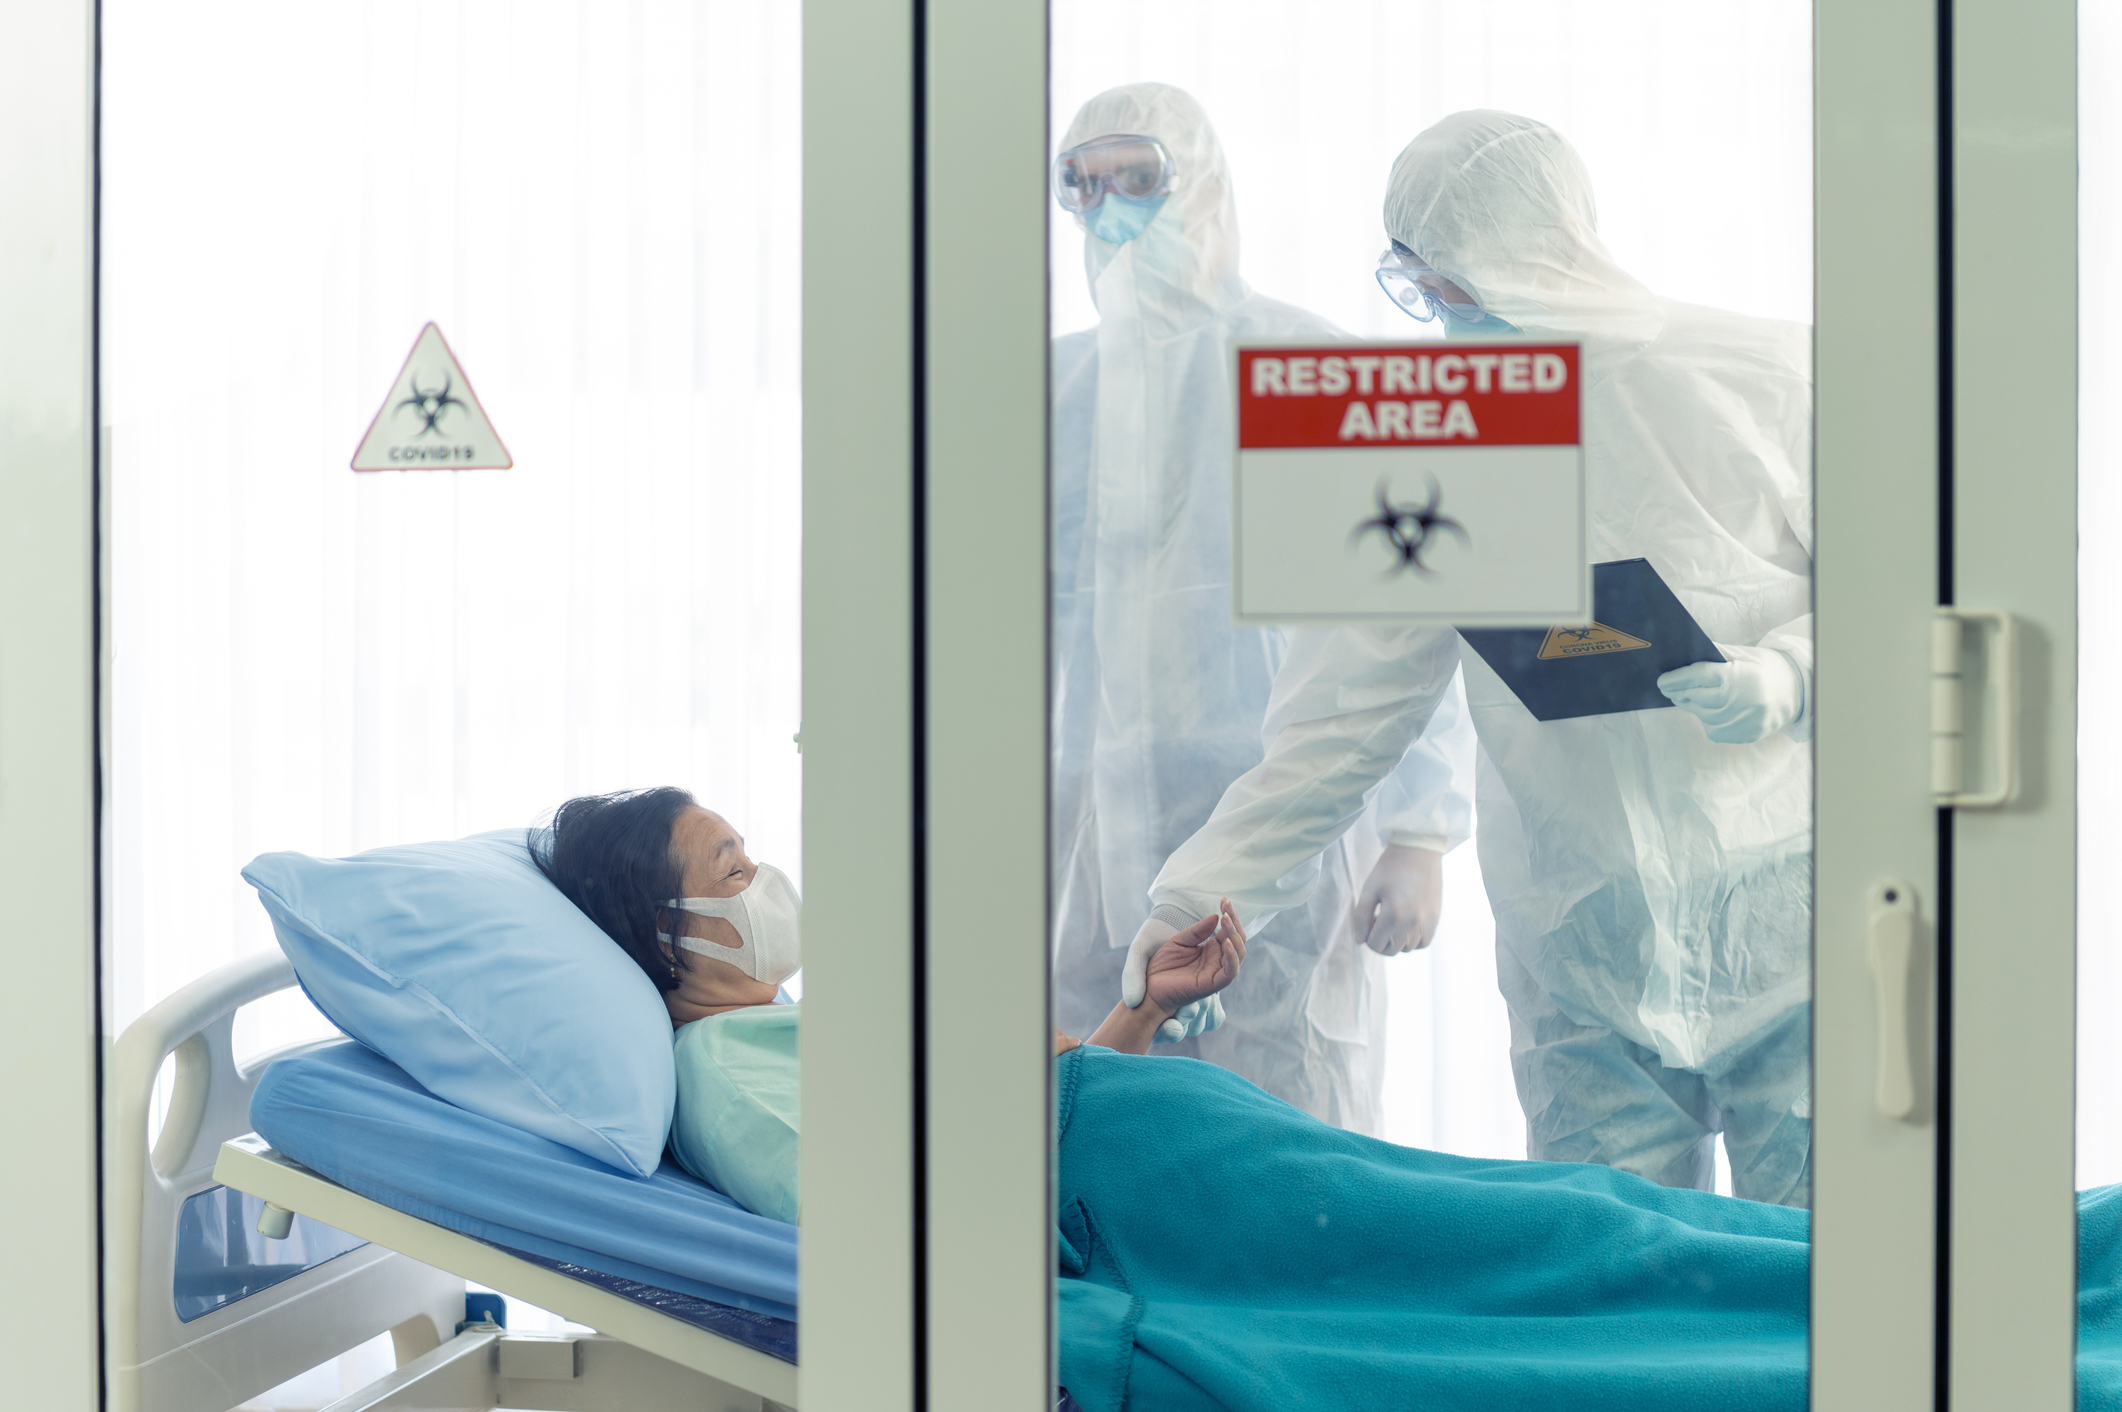 woman in a private hospital area with nurses wearing hazmat suits